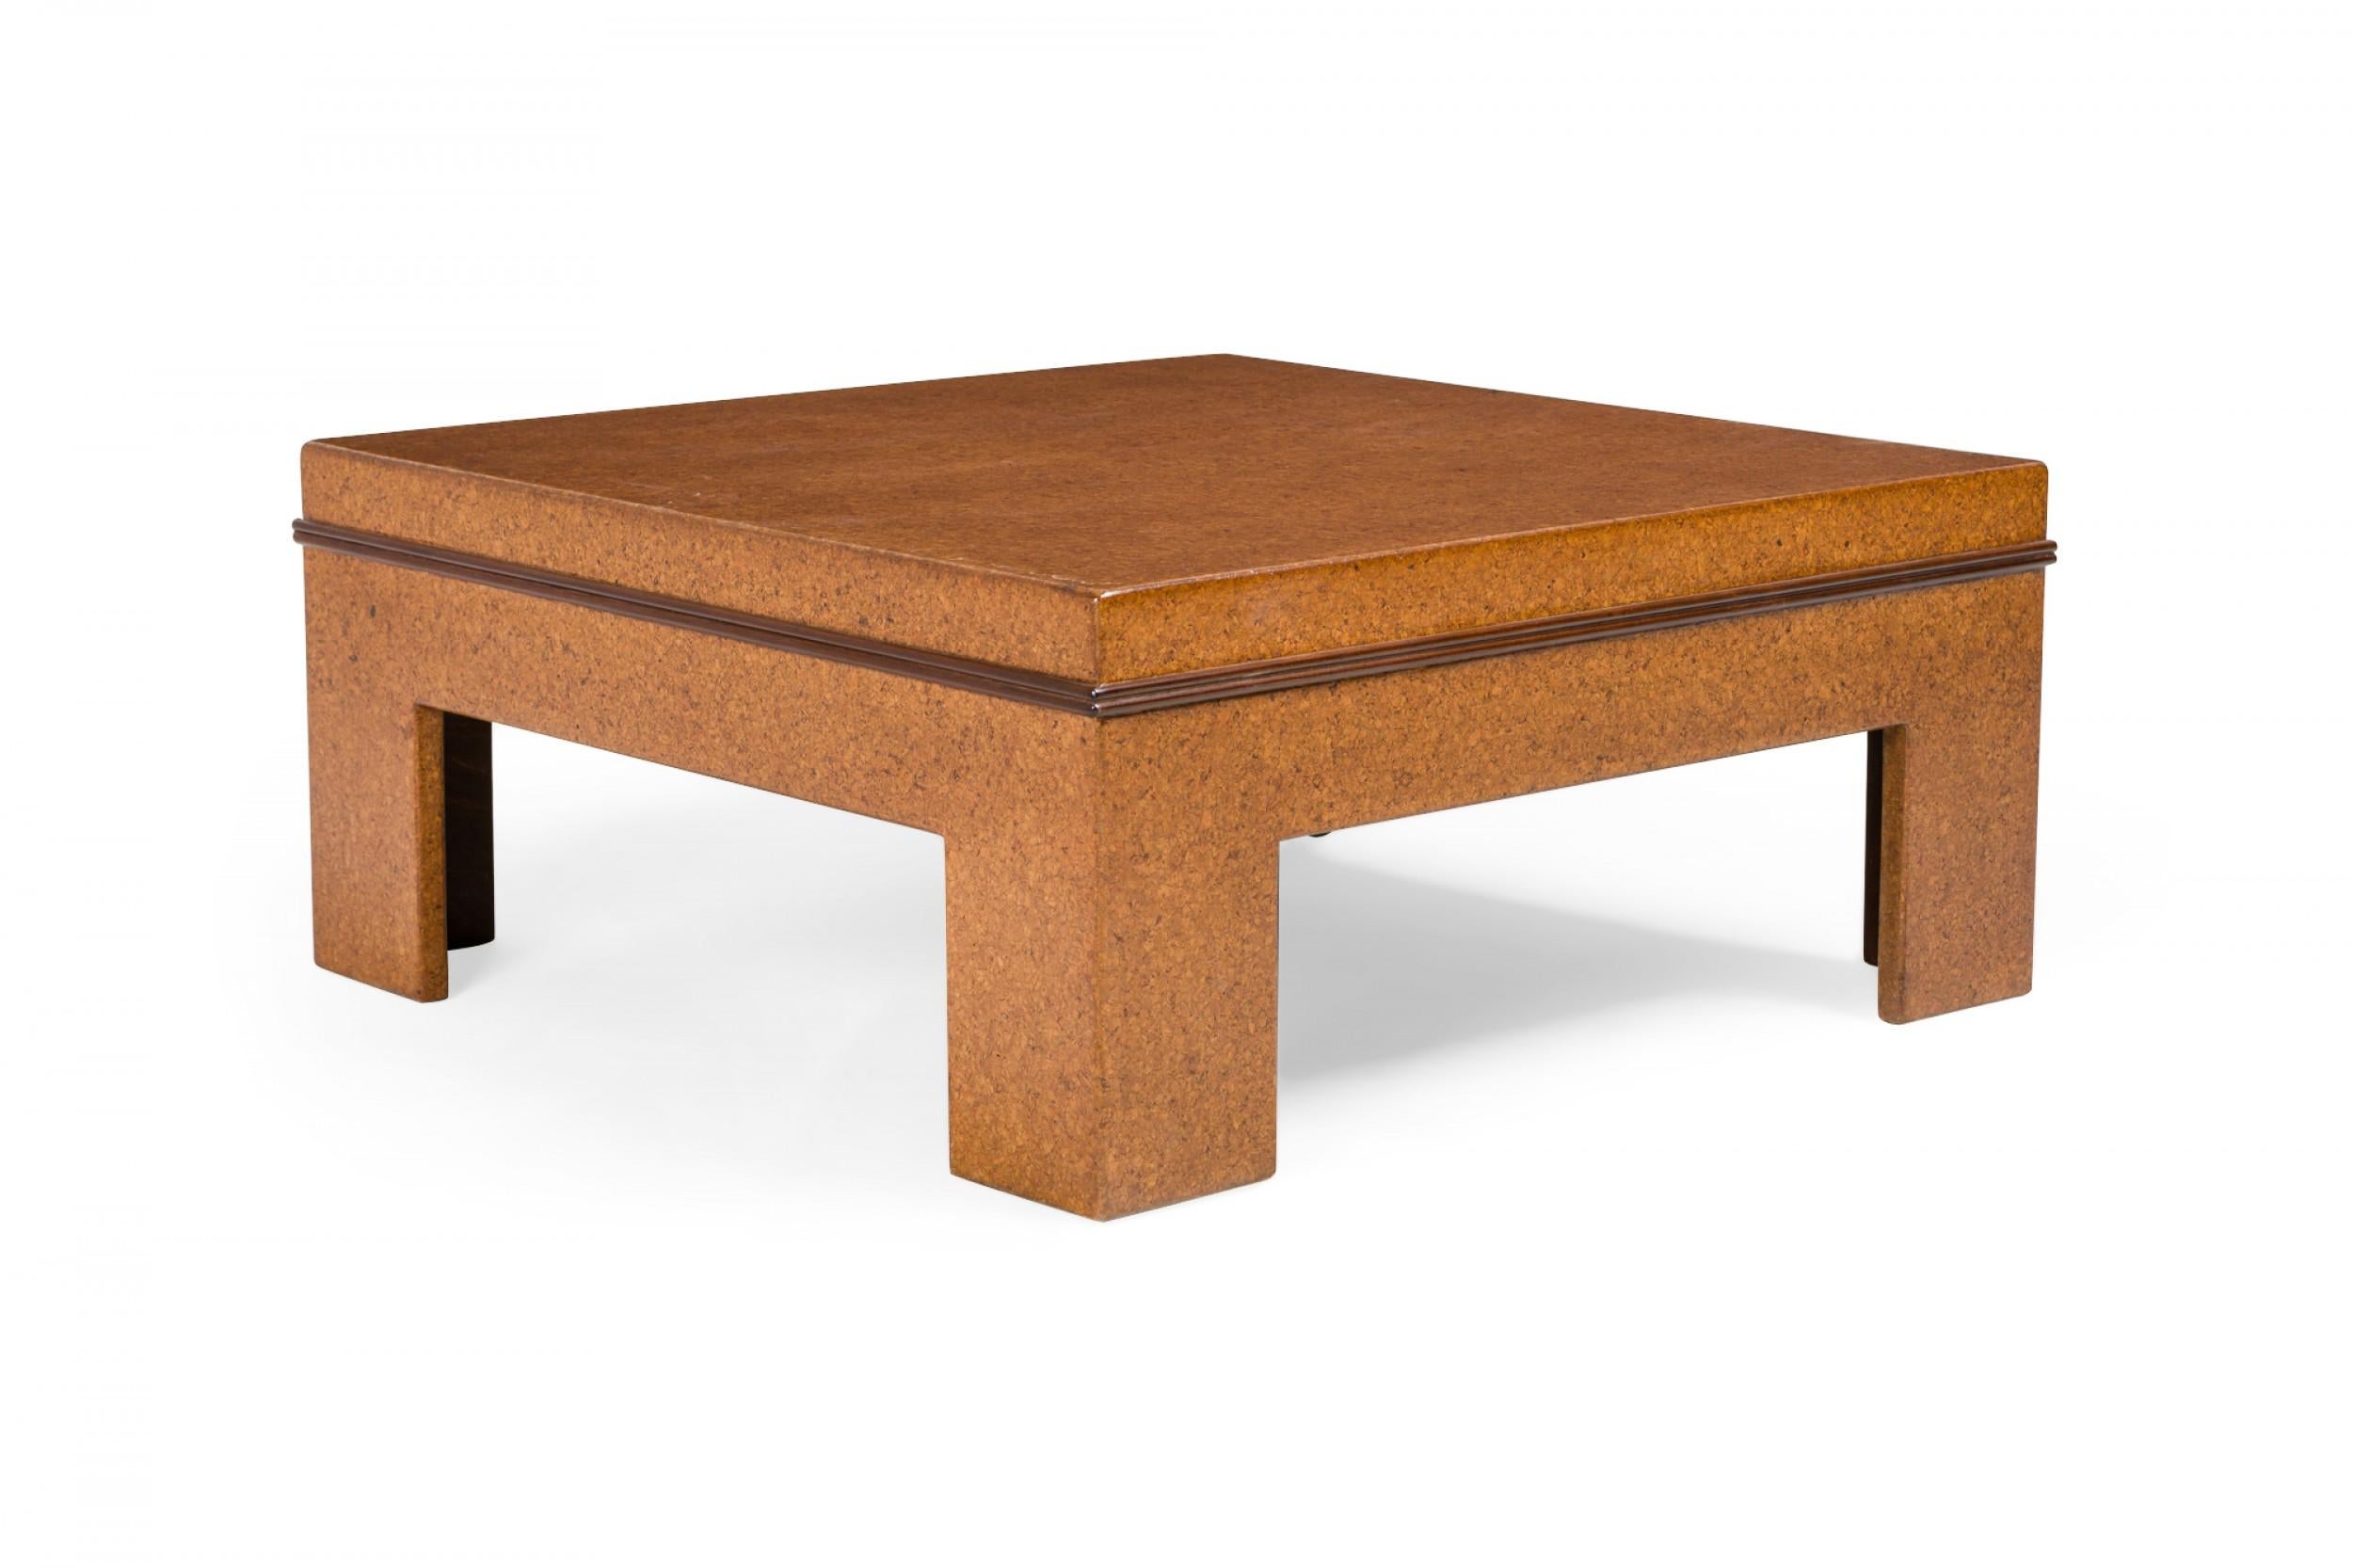 American mid-century square cocktail / coffee table with a cork top and cork veneer, resting on four squared legs. (PAUL FRANKL).